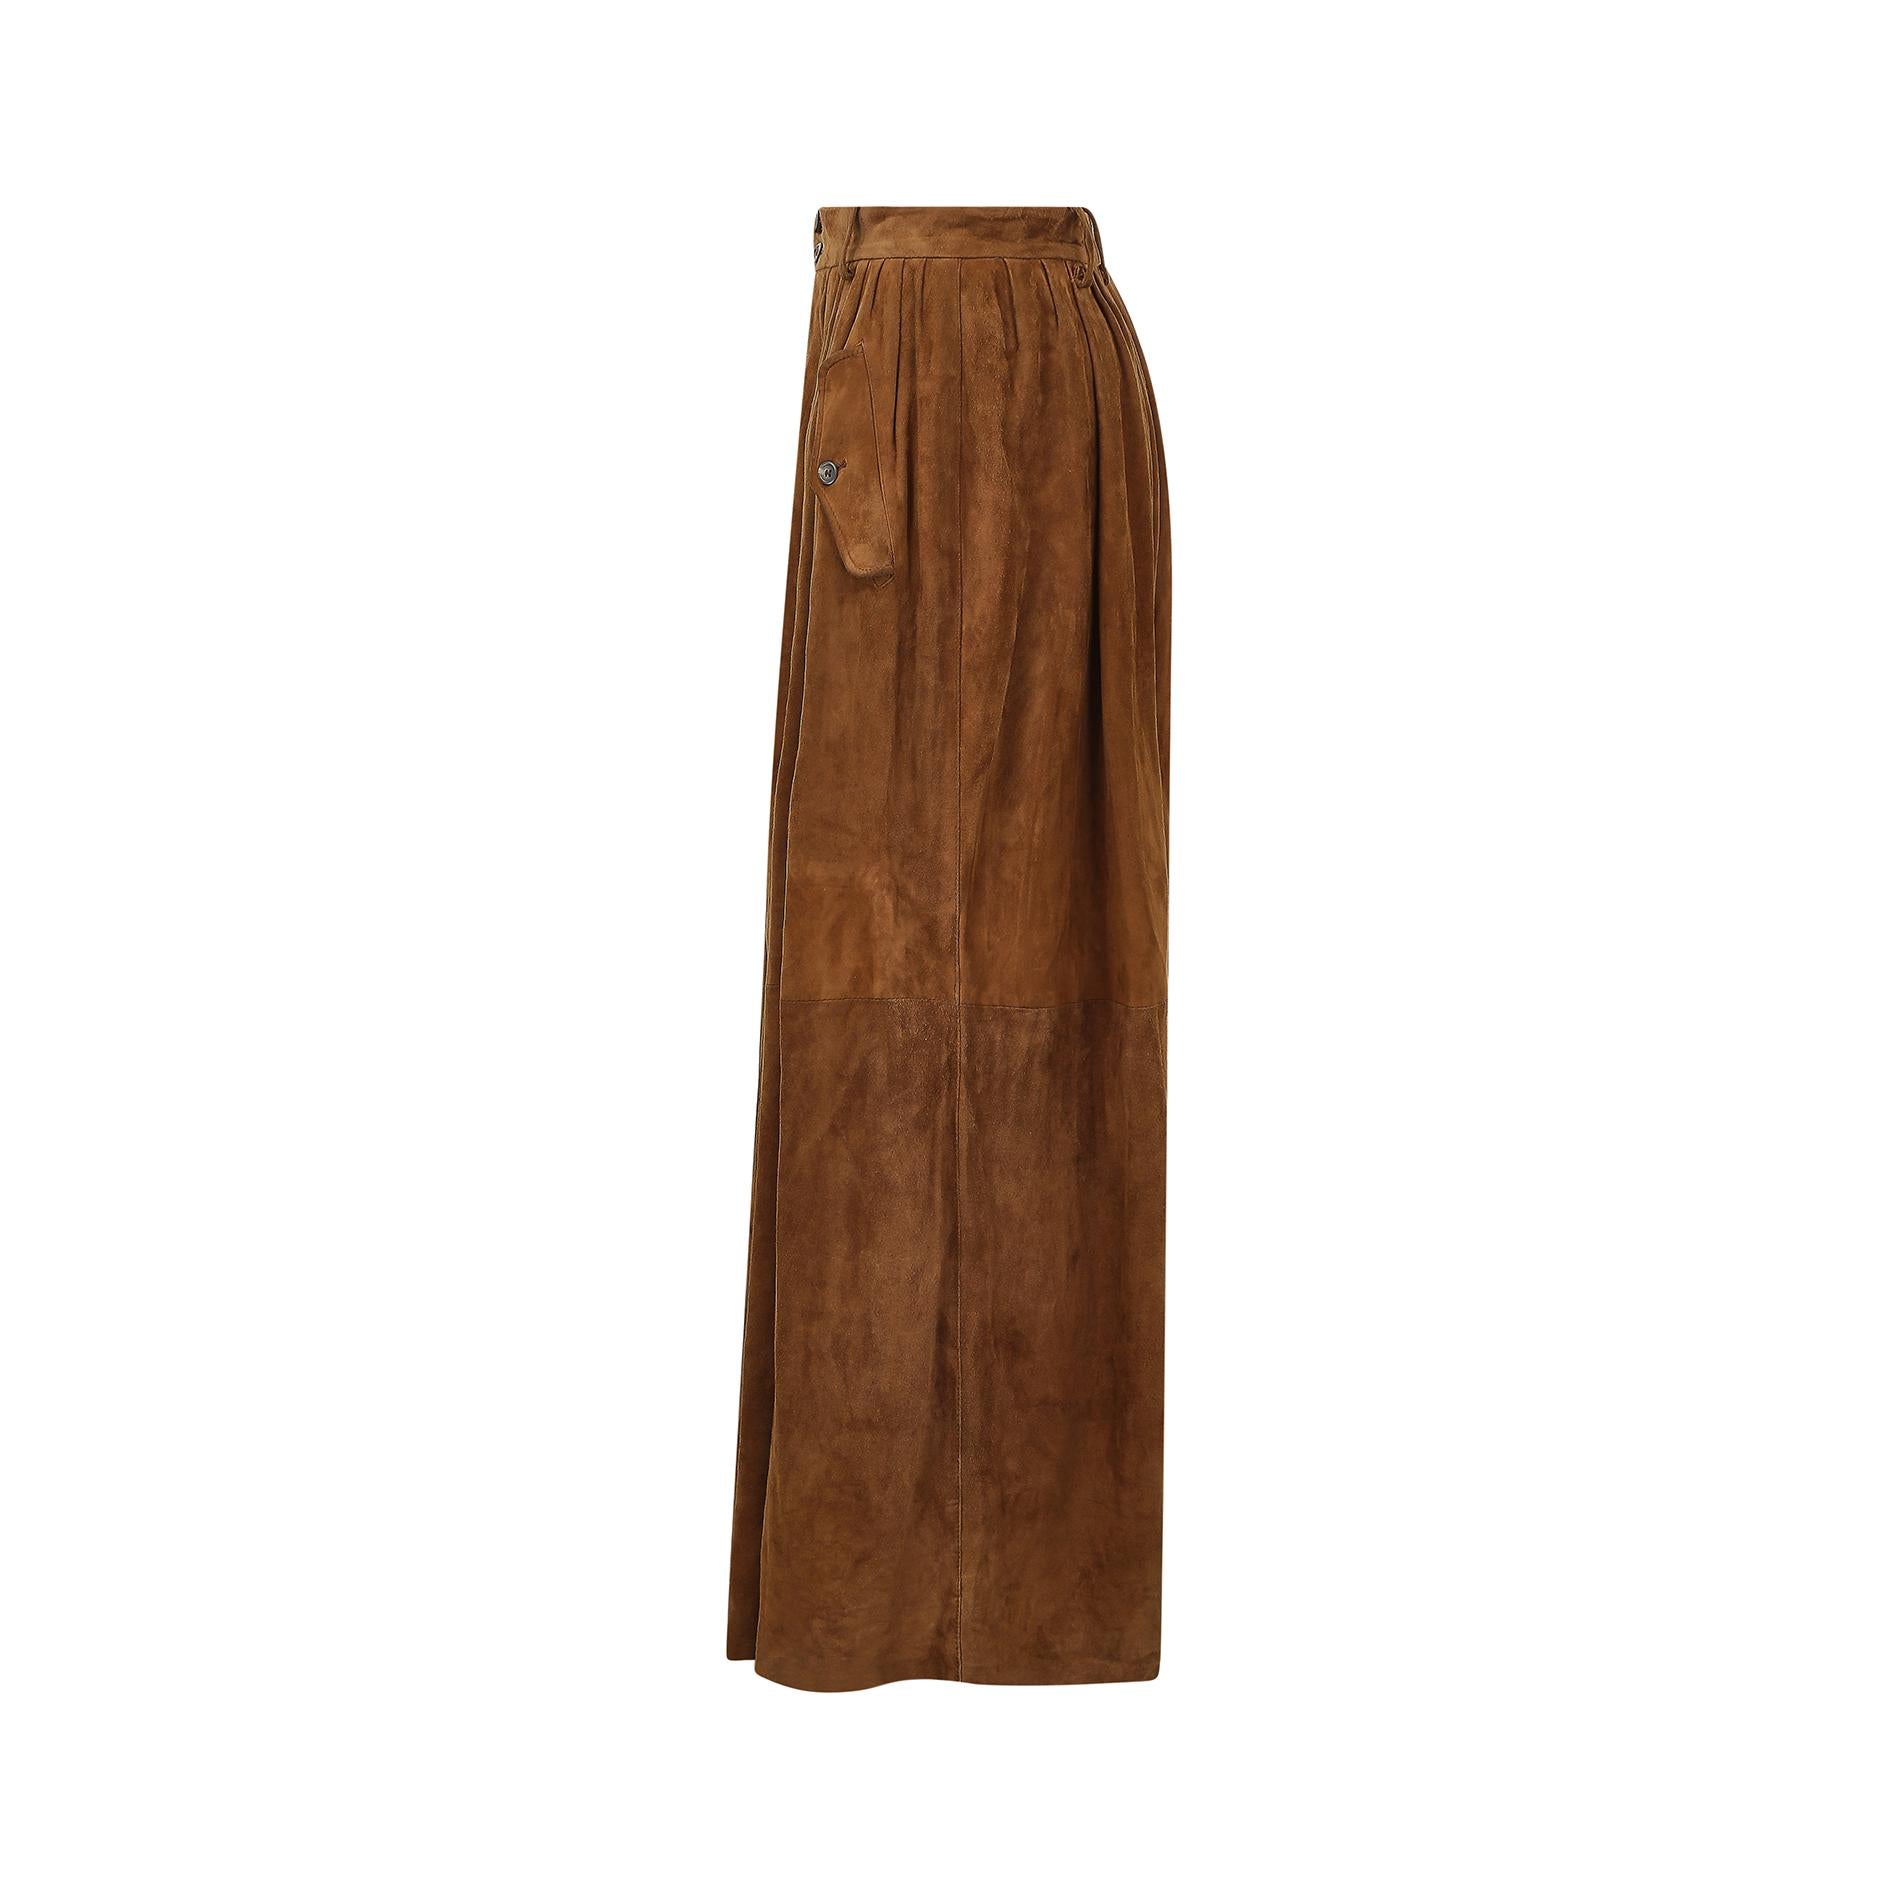 This is a fine early to mid 1980s Italian brown suede maxi skirt by Ralph Lauren from what was at the time, the mainline collection as the flagship purple label was introduced in 1994.  This was purchased as part of a small collection of very